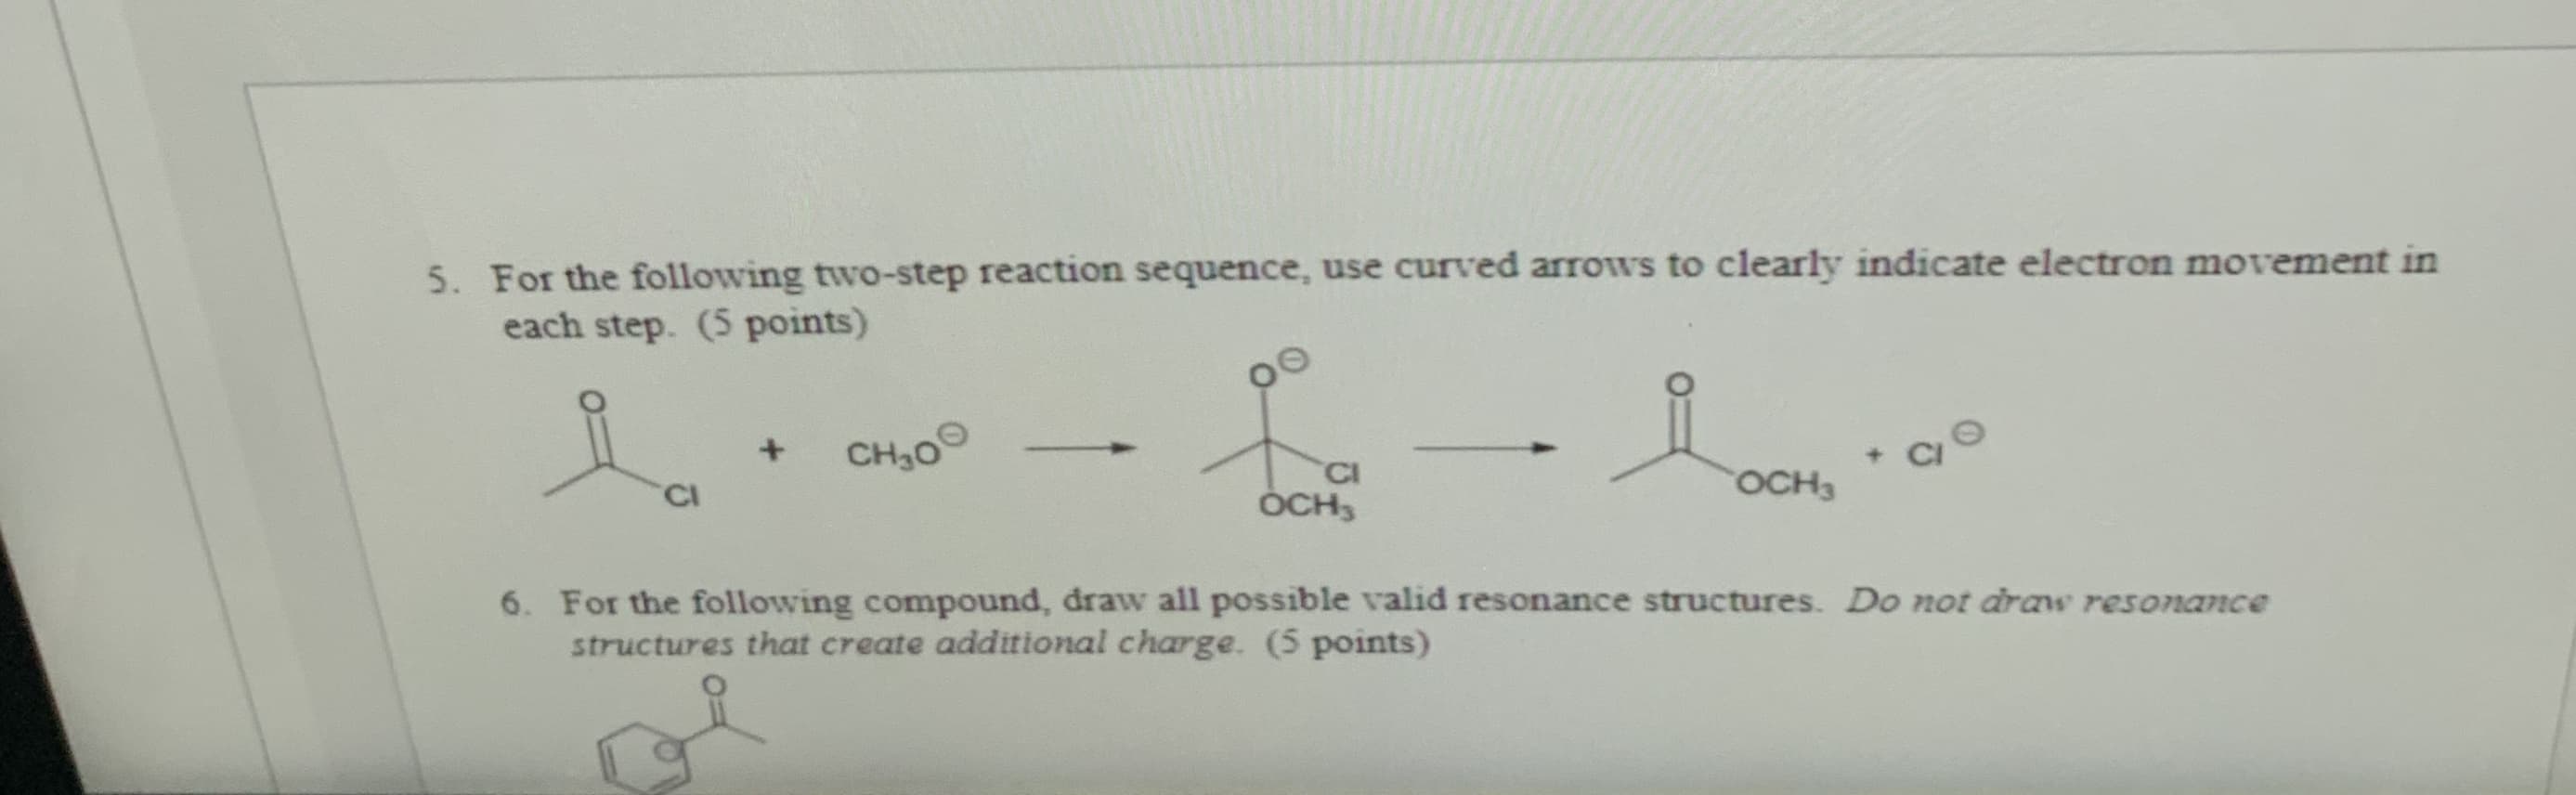 5. For the following two-step reaction sequence, use curved arrows to clearly indicate electron movement in
each step. (5 points)
CH30
+]
OCH3
ÓCH3
